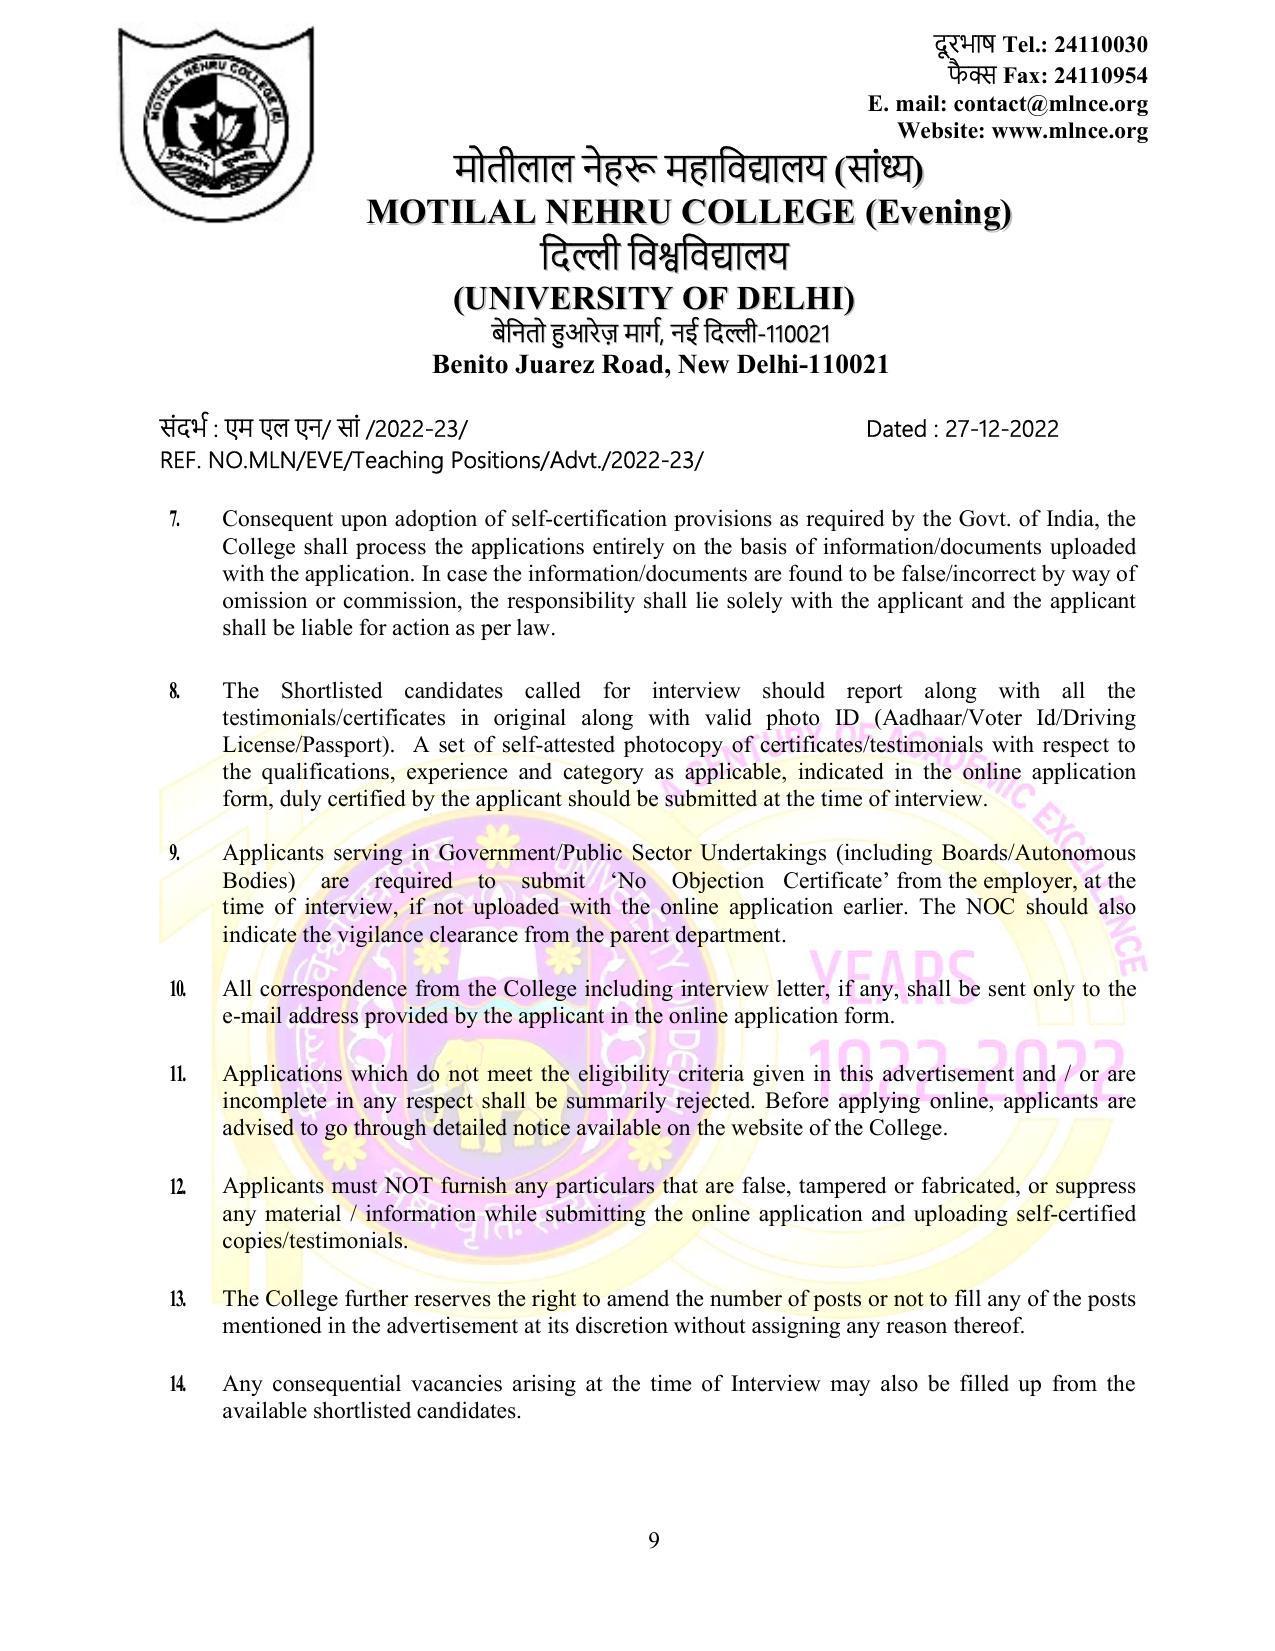 Motilal Nehru College (Evening) Invites Application for 75 Assistant Professor Recruitment 2022 - Page 3